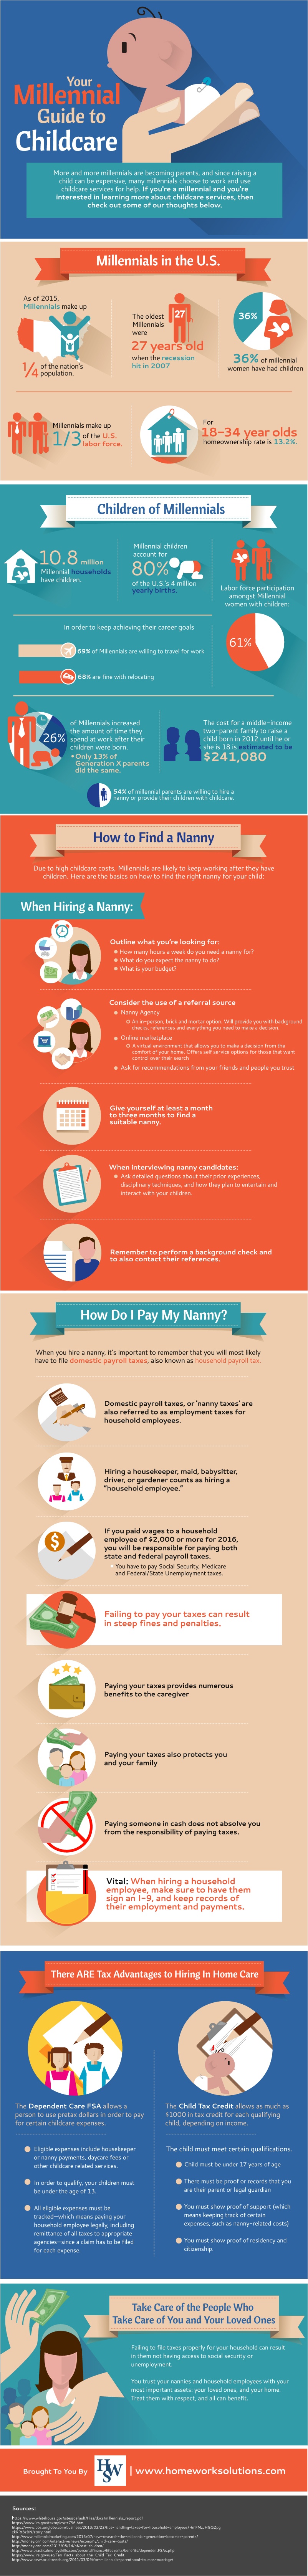 Your Millennial Guide to Childcare [INFOGRAPHIC]